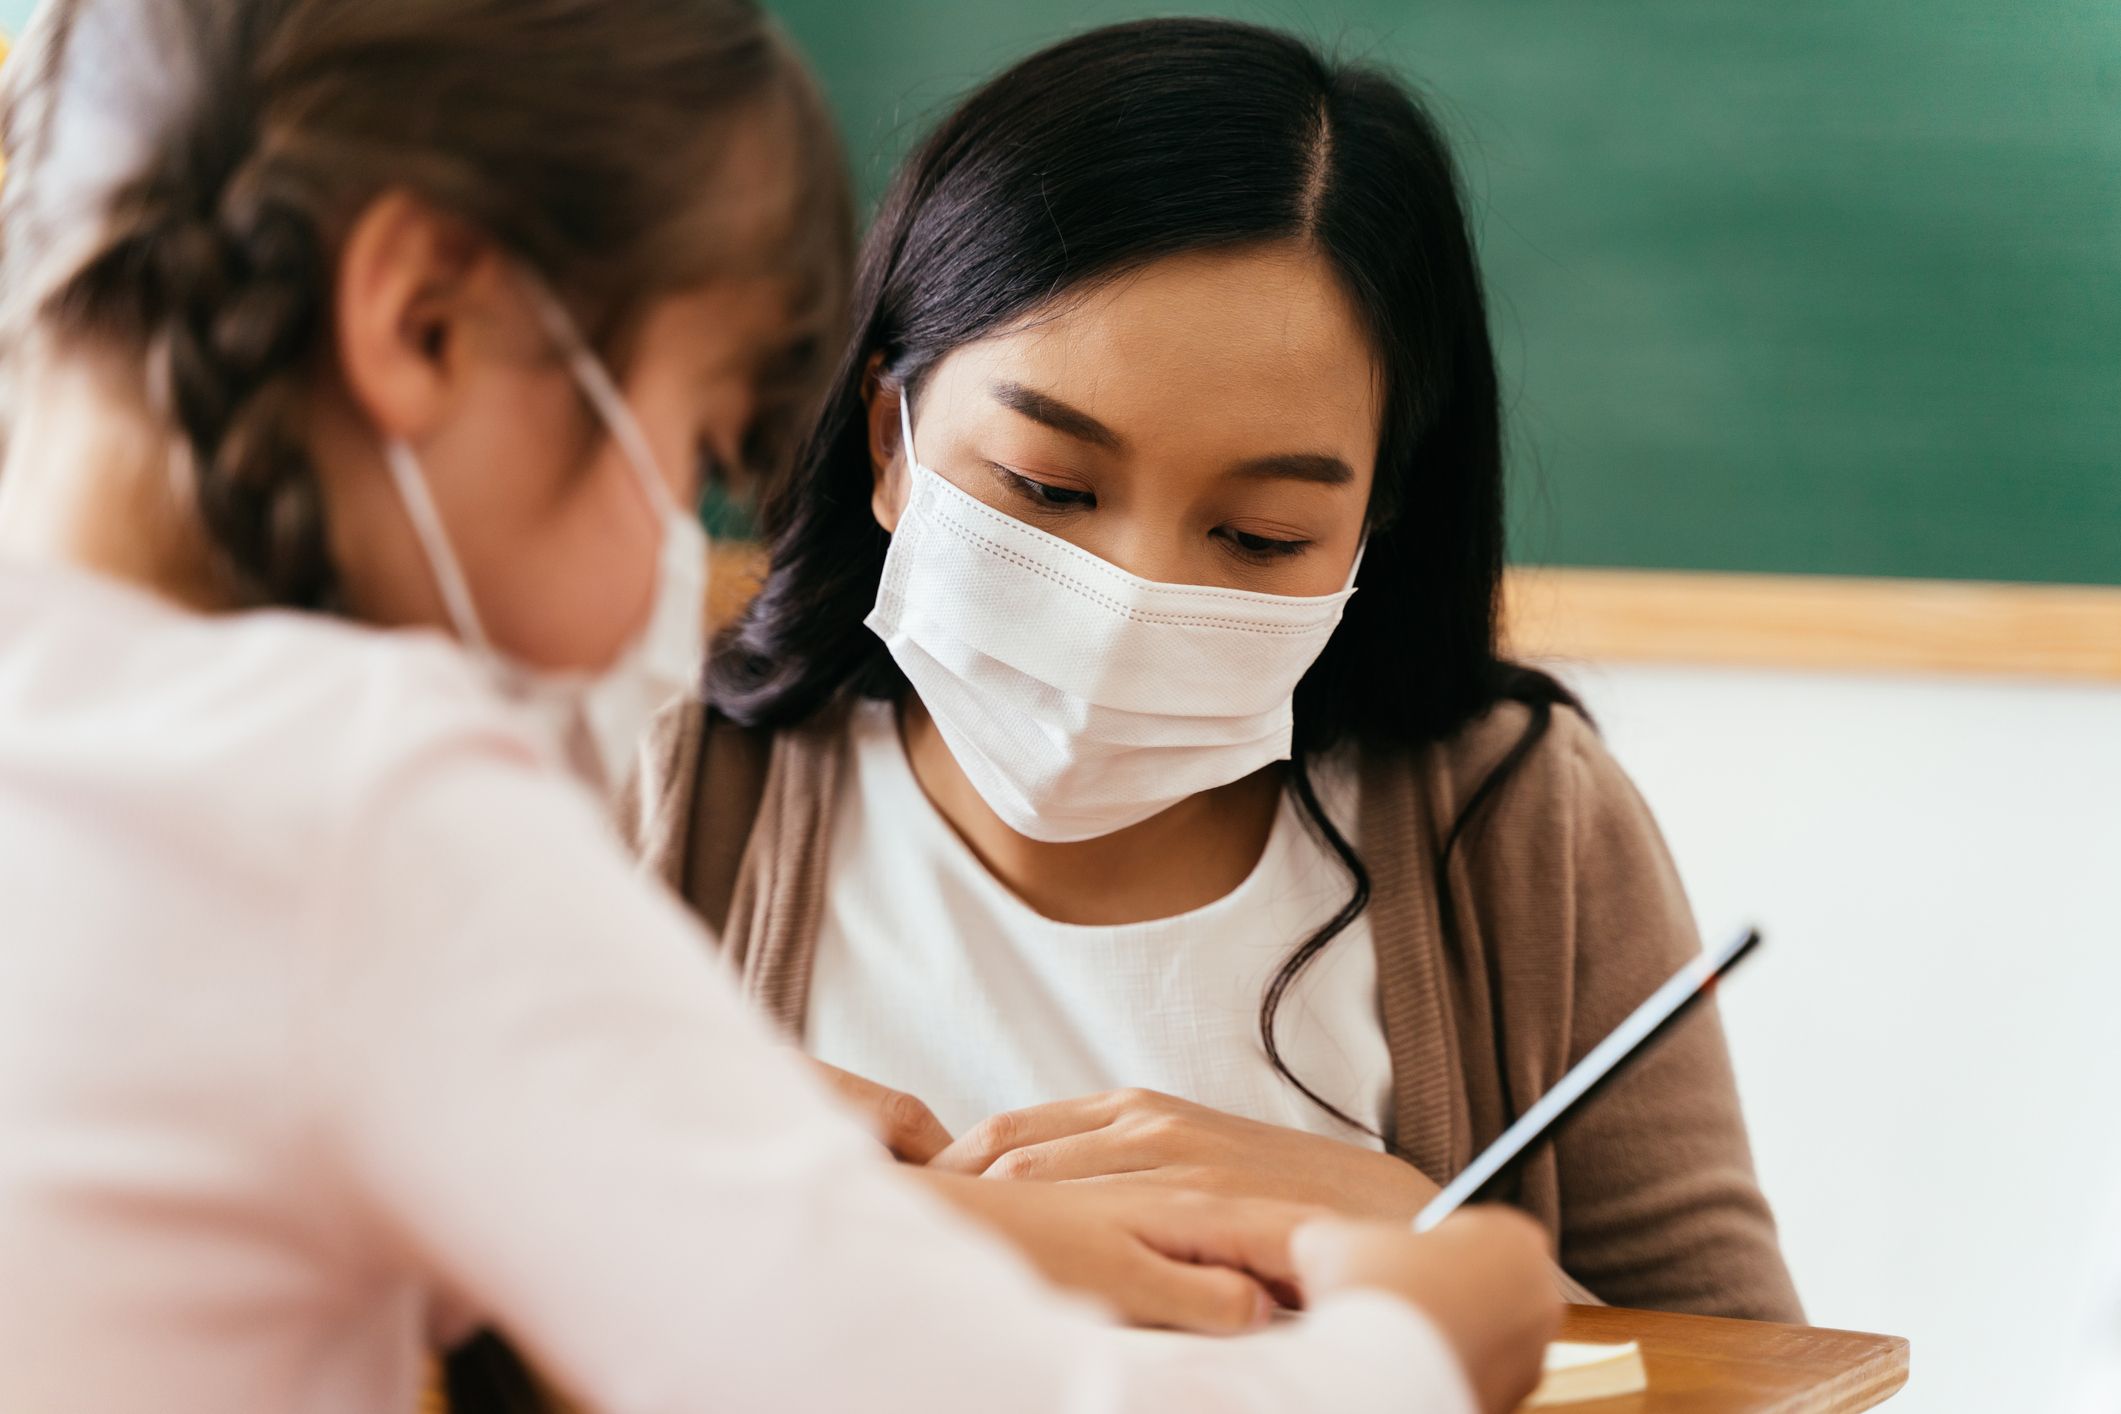 There have been conflicting reports about the infection risks teachers face amid COVID-19.